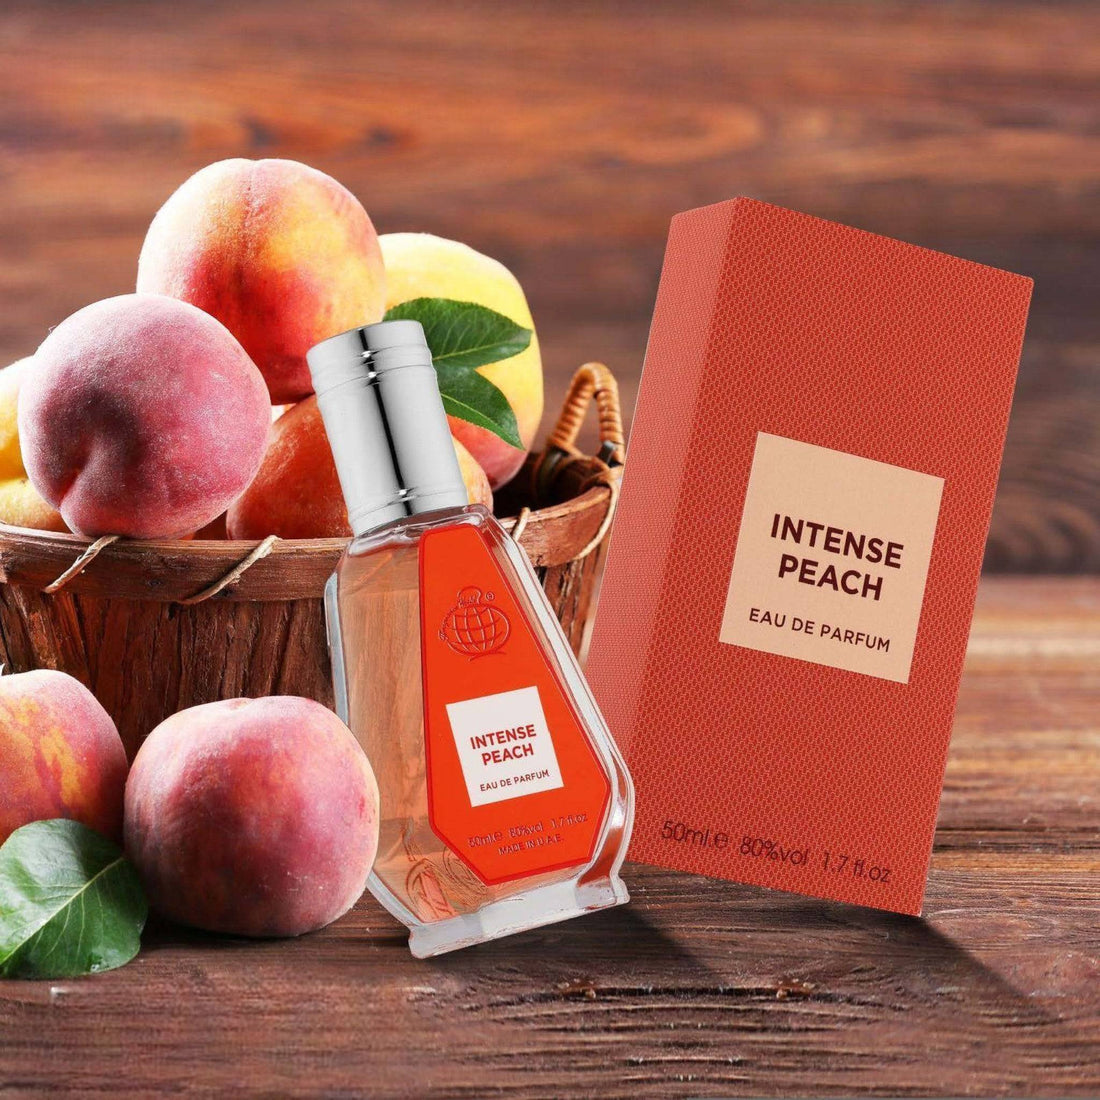 Intense Peach Eau De Parfum bottle by Fragrance World, embodying a luxurious blend of amber, vanilla, and lush peach notes.